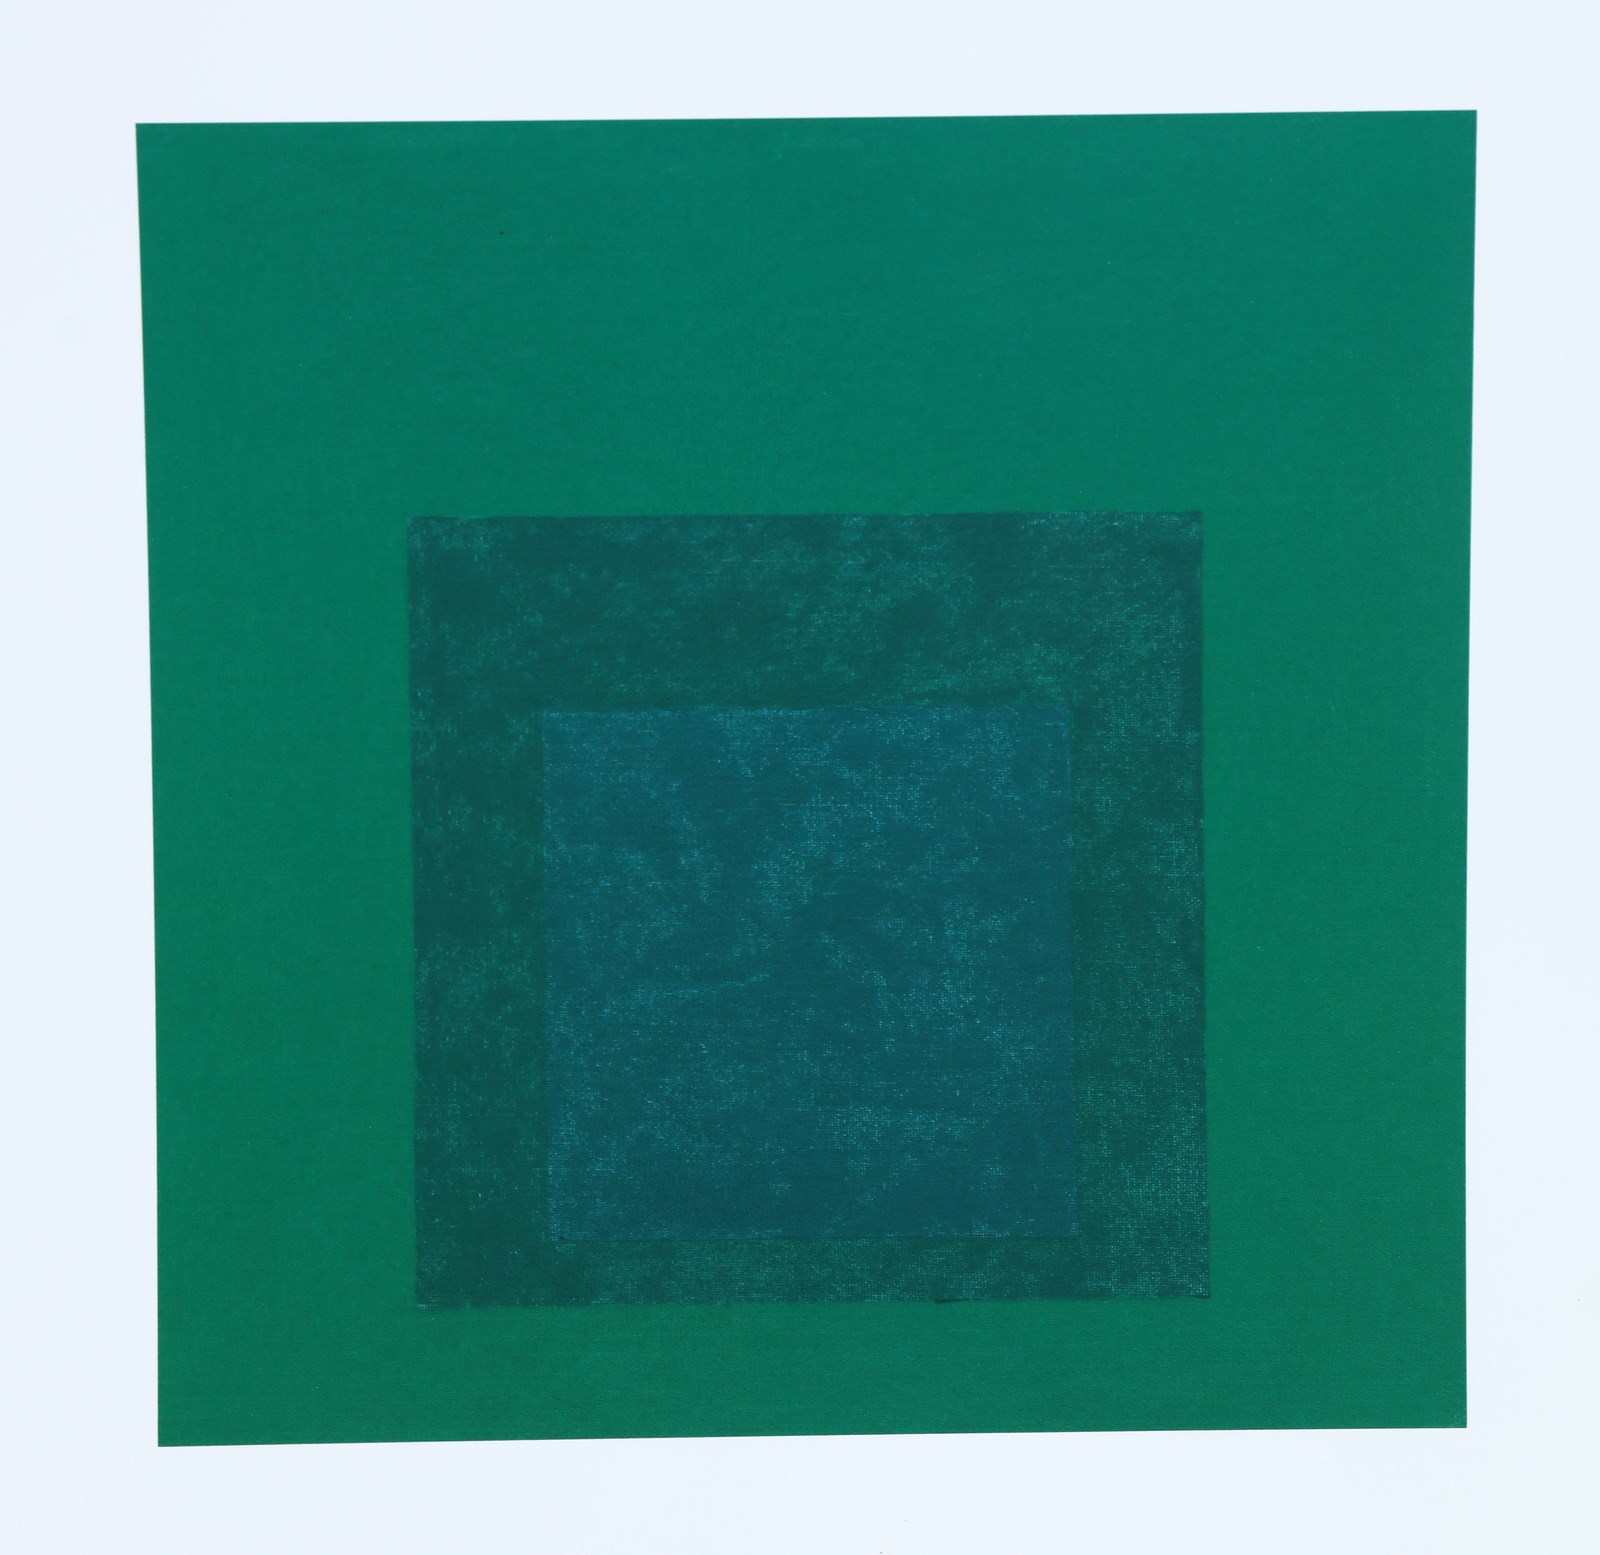 Study for homage to the square. (Josef Albers)